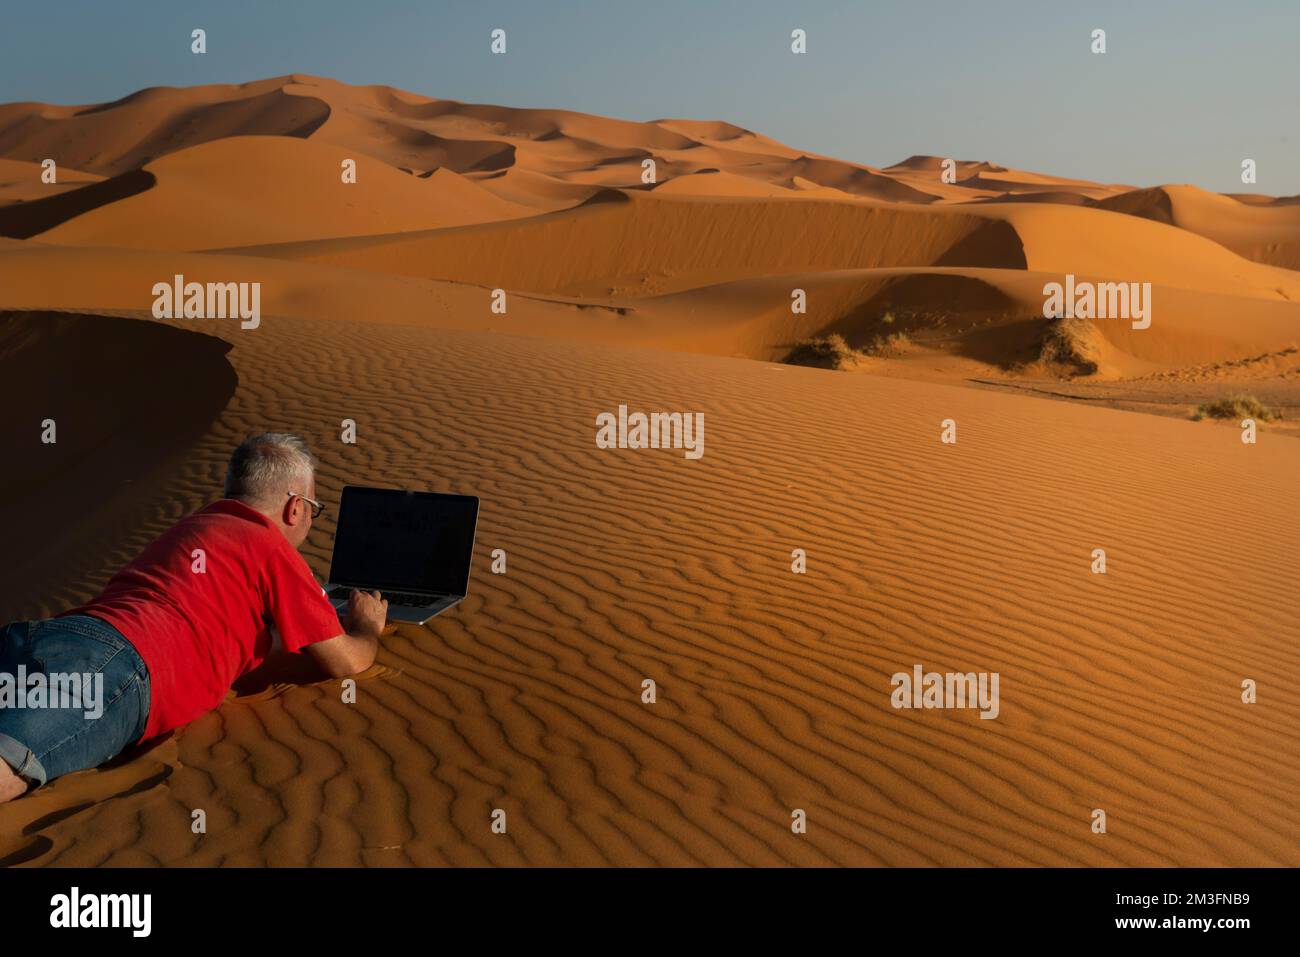 Remote work from the desert Stock Photo